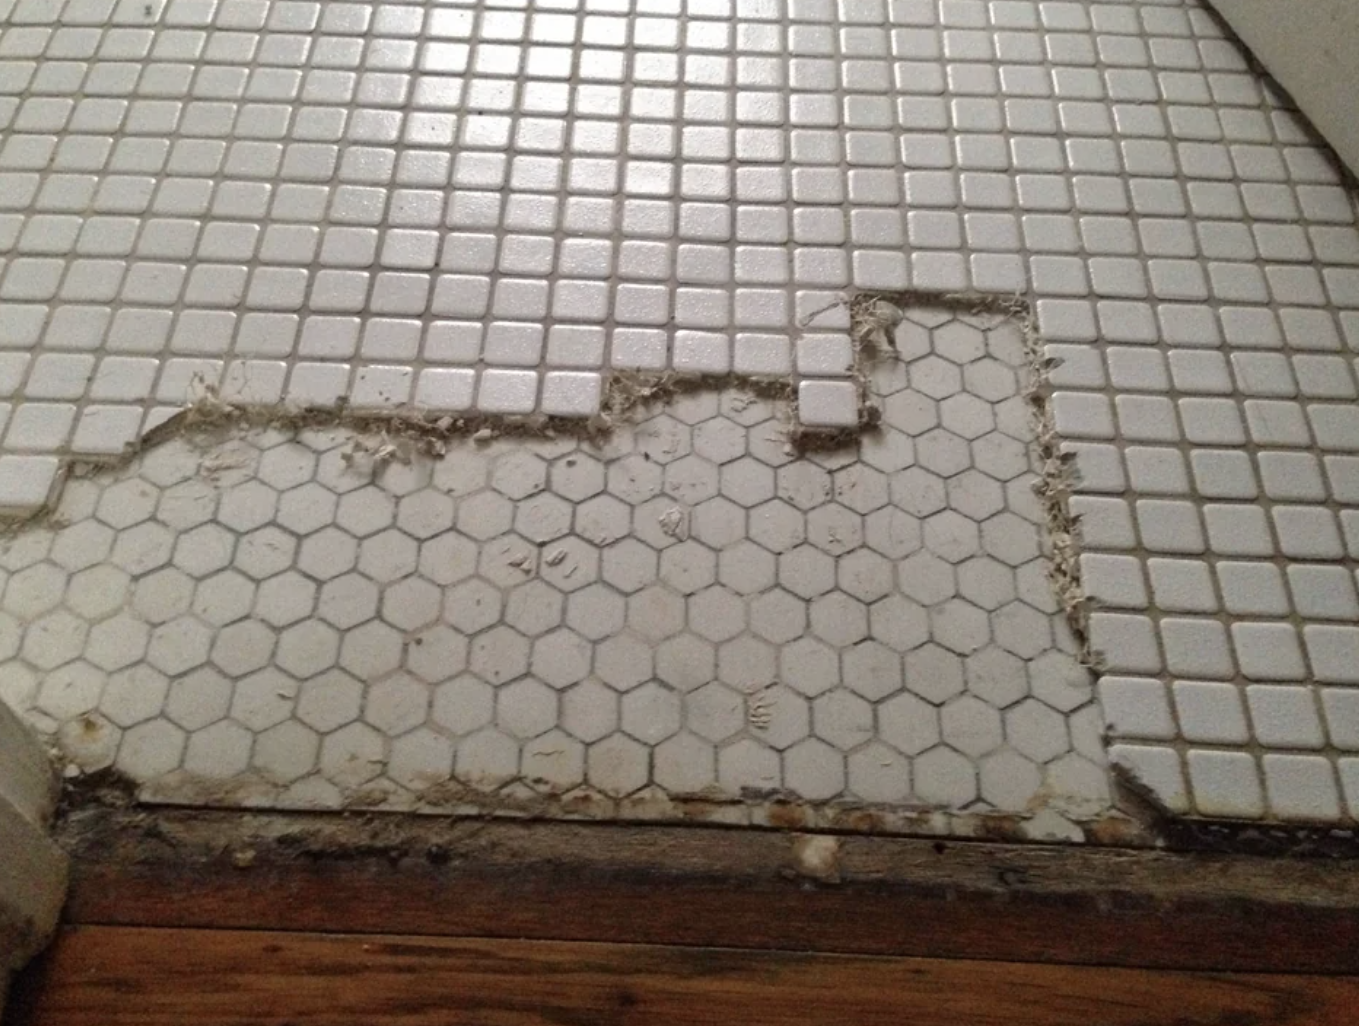 Vintage white hexagonal bathroom tile, freestanding tub with shower, period-appropriate fixtures